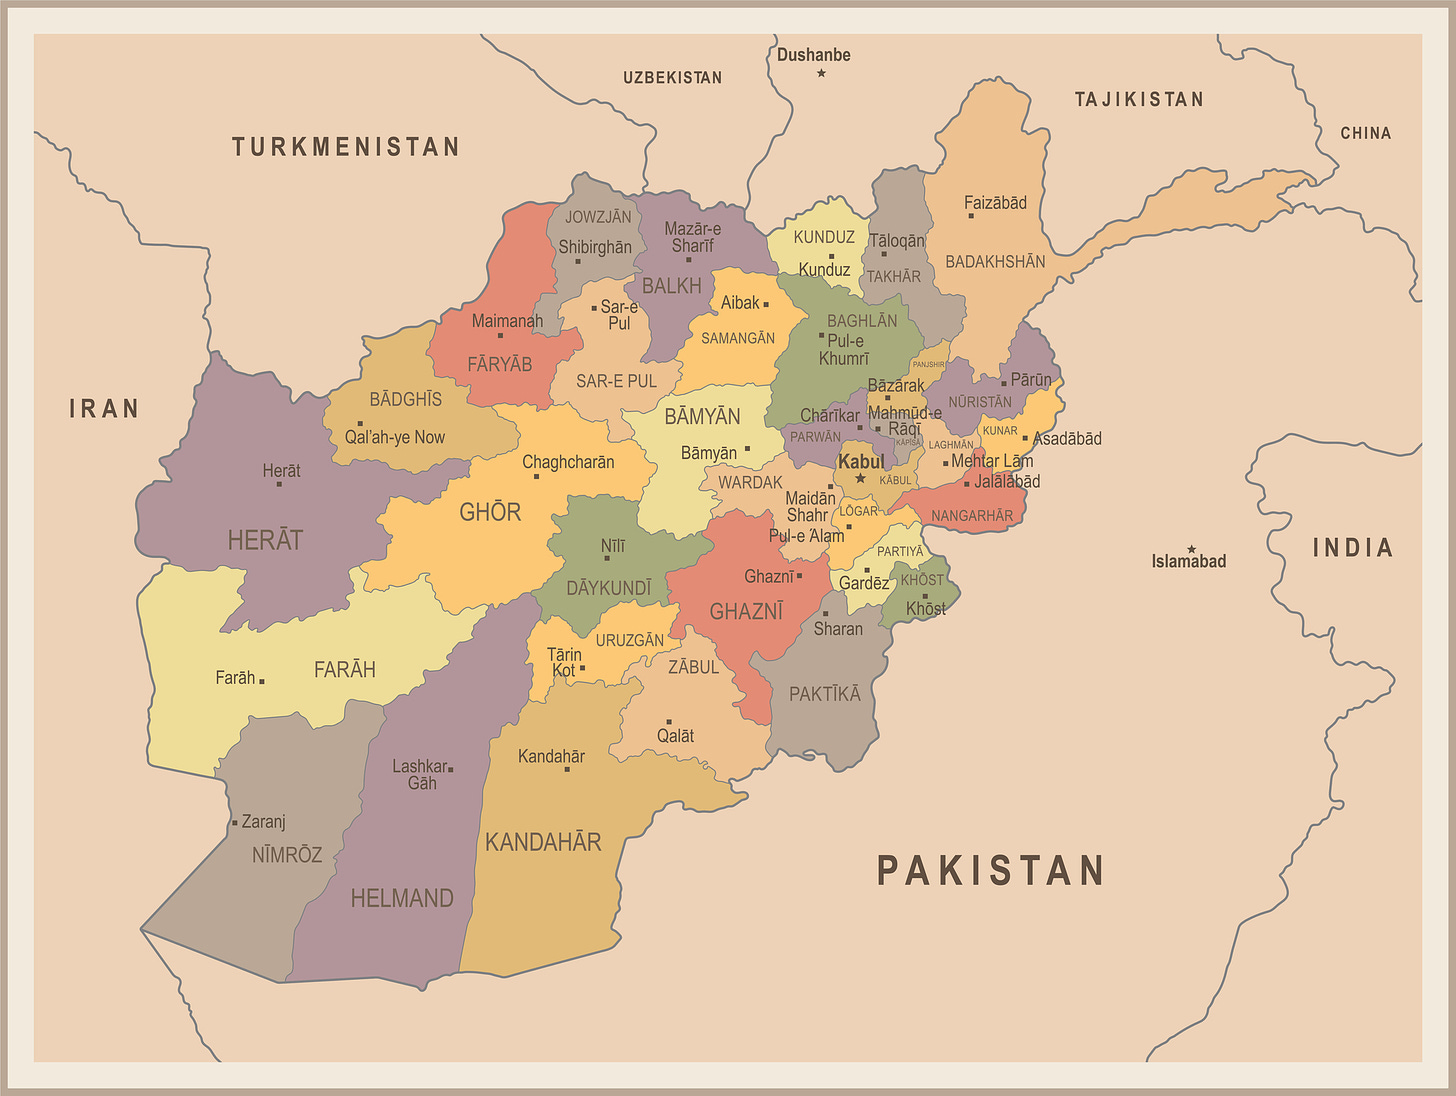 A map of Afghanistan showing its major cities, divisions and neighboring countries